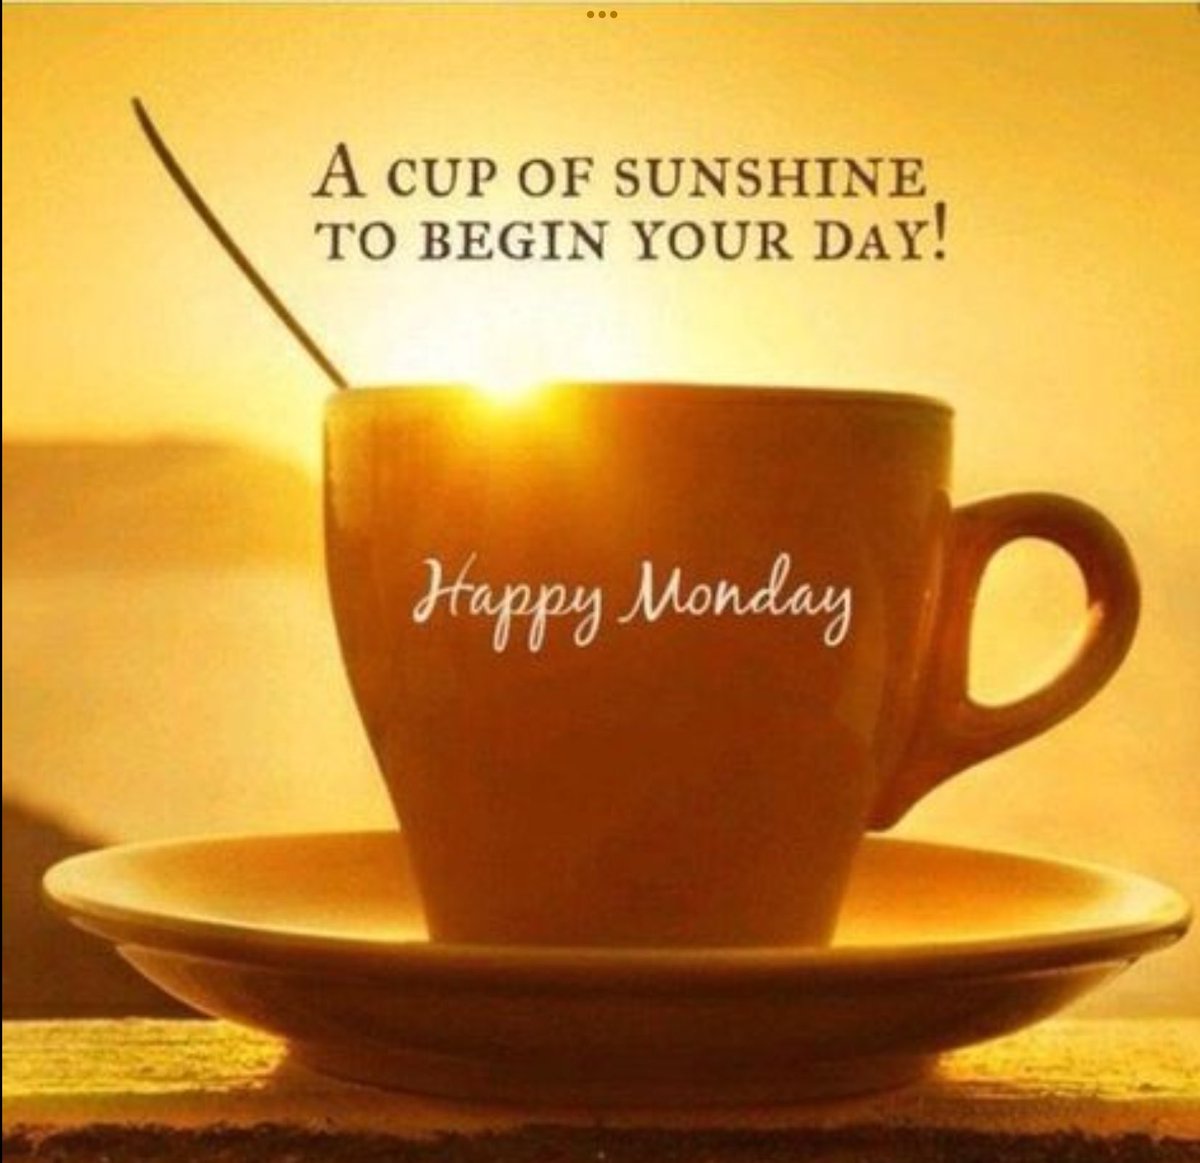 ☕️🙋🏼‍♀️☕️

May there be sunshine in your day !

#Coffee helps

@Cbp8Cindy @QueenBeanCoffee @suziday123 @LoveCoffeeHour @FreshRoasters @Stefeenew 

#CoffeeLover #CoffeeLovers #CoffeeTime #CoffeeTalk #CoffeeAddicts #CoffeeCulture #CoffeeCup #Coffeeshop  #CoffeeKings  #CoffeeClub